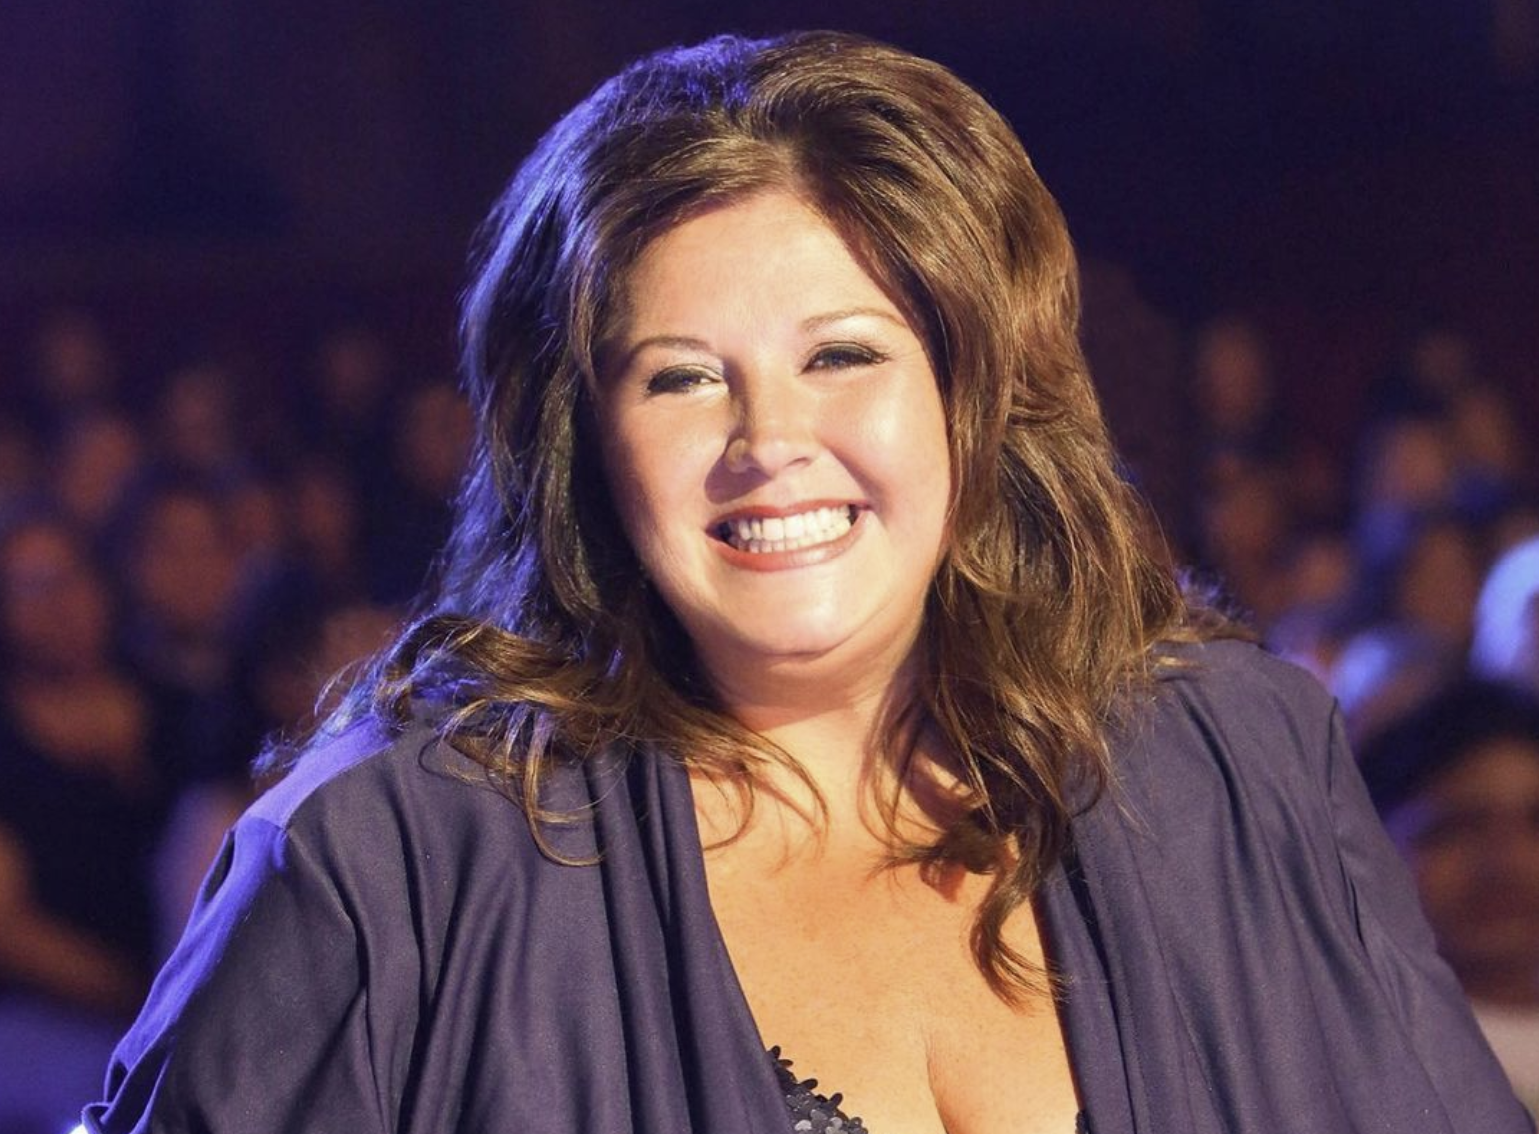 Abby Lee Miller is Back with a New Dance Series...See New Trailer Here